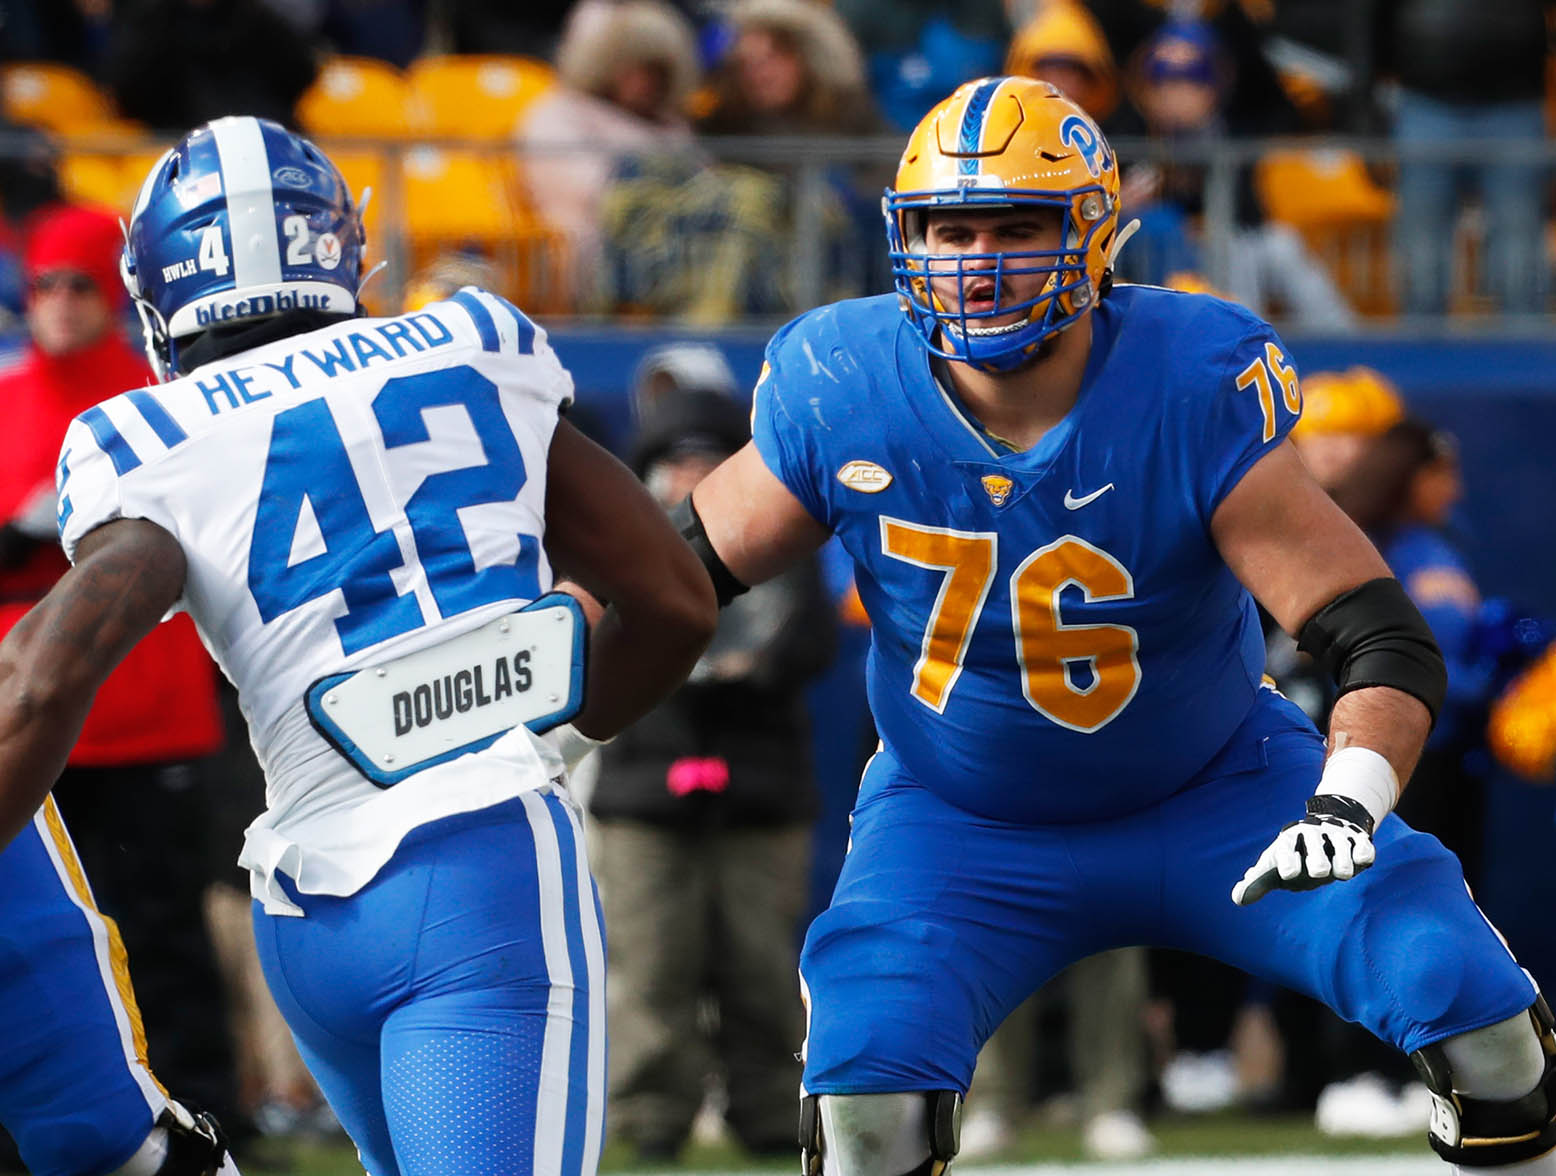 Nov 19, 2022; Pittsburgh, Pennsylvania, USA; Pittsburgh Panthers offensive lineman Matt Goncalves (76) blocks at the line of scrimmage against Duke Blue Devils linebacker Shaka Heyward (42) during the first quarter at Acrisure Stadium. Mandatory Credit: Charles LeClaire-USA TODAY Sports